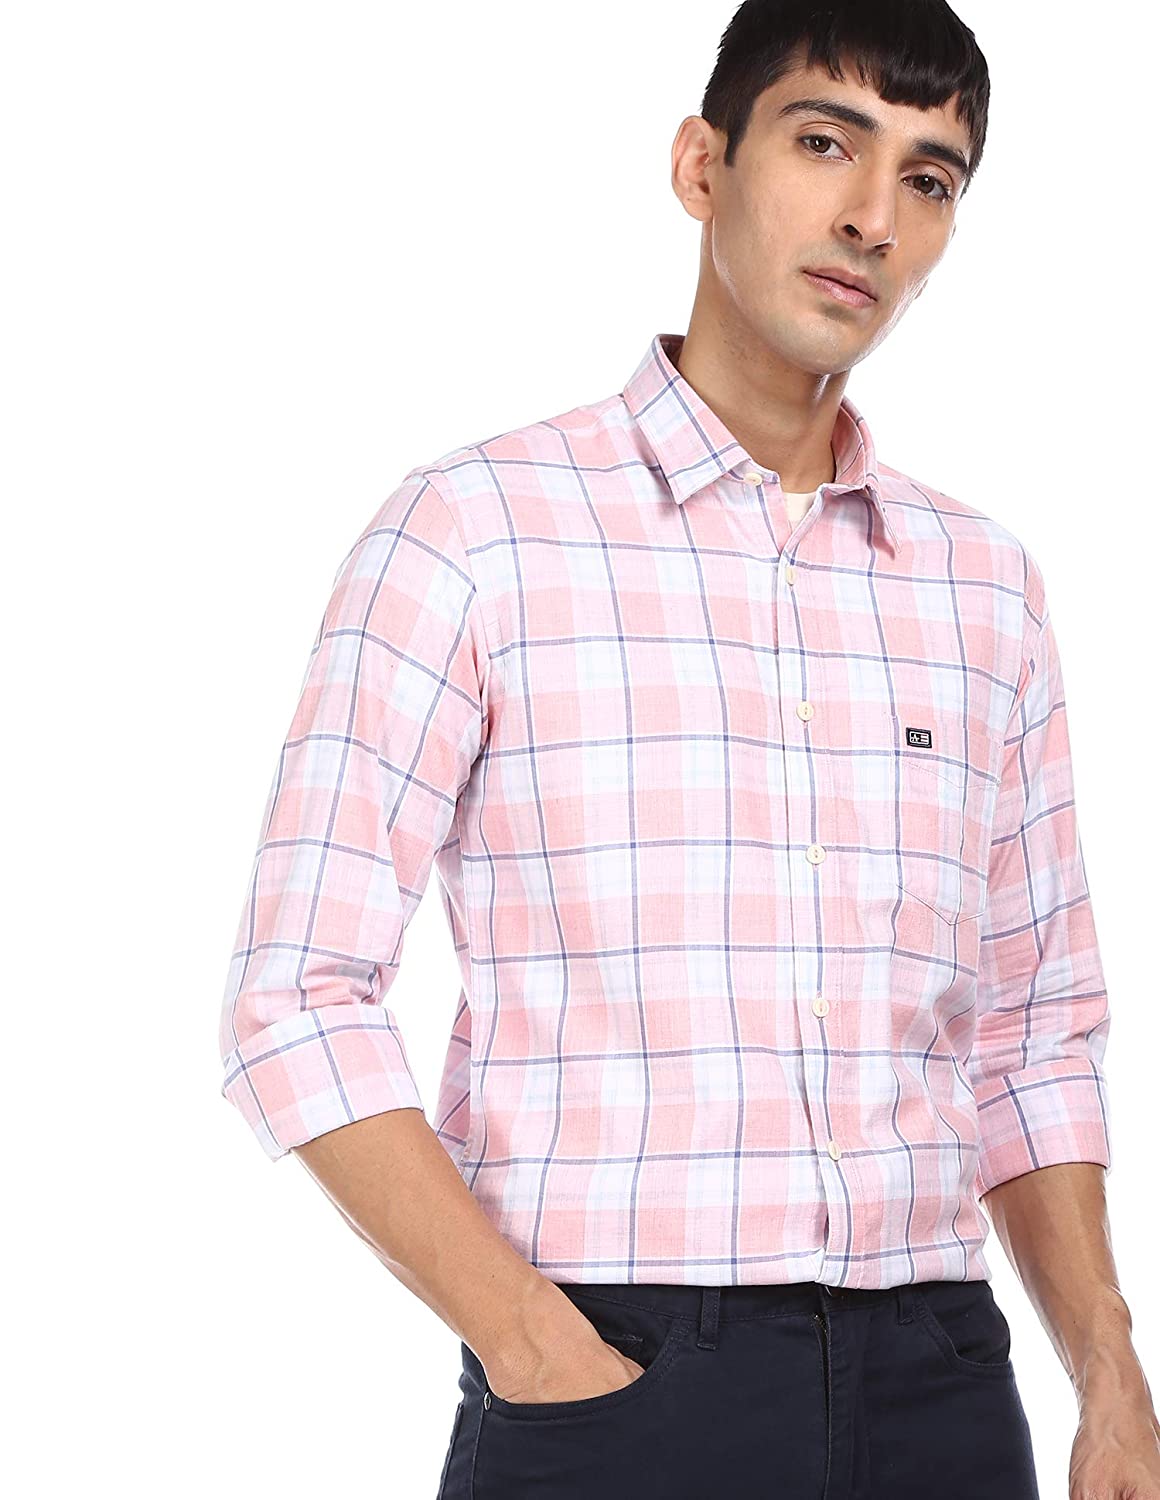 Top 10 Men's Shirt Brands in India 2023 with Guidelines to Get the Best Fit  Shirt and Fabrics